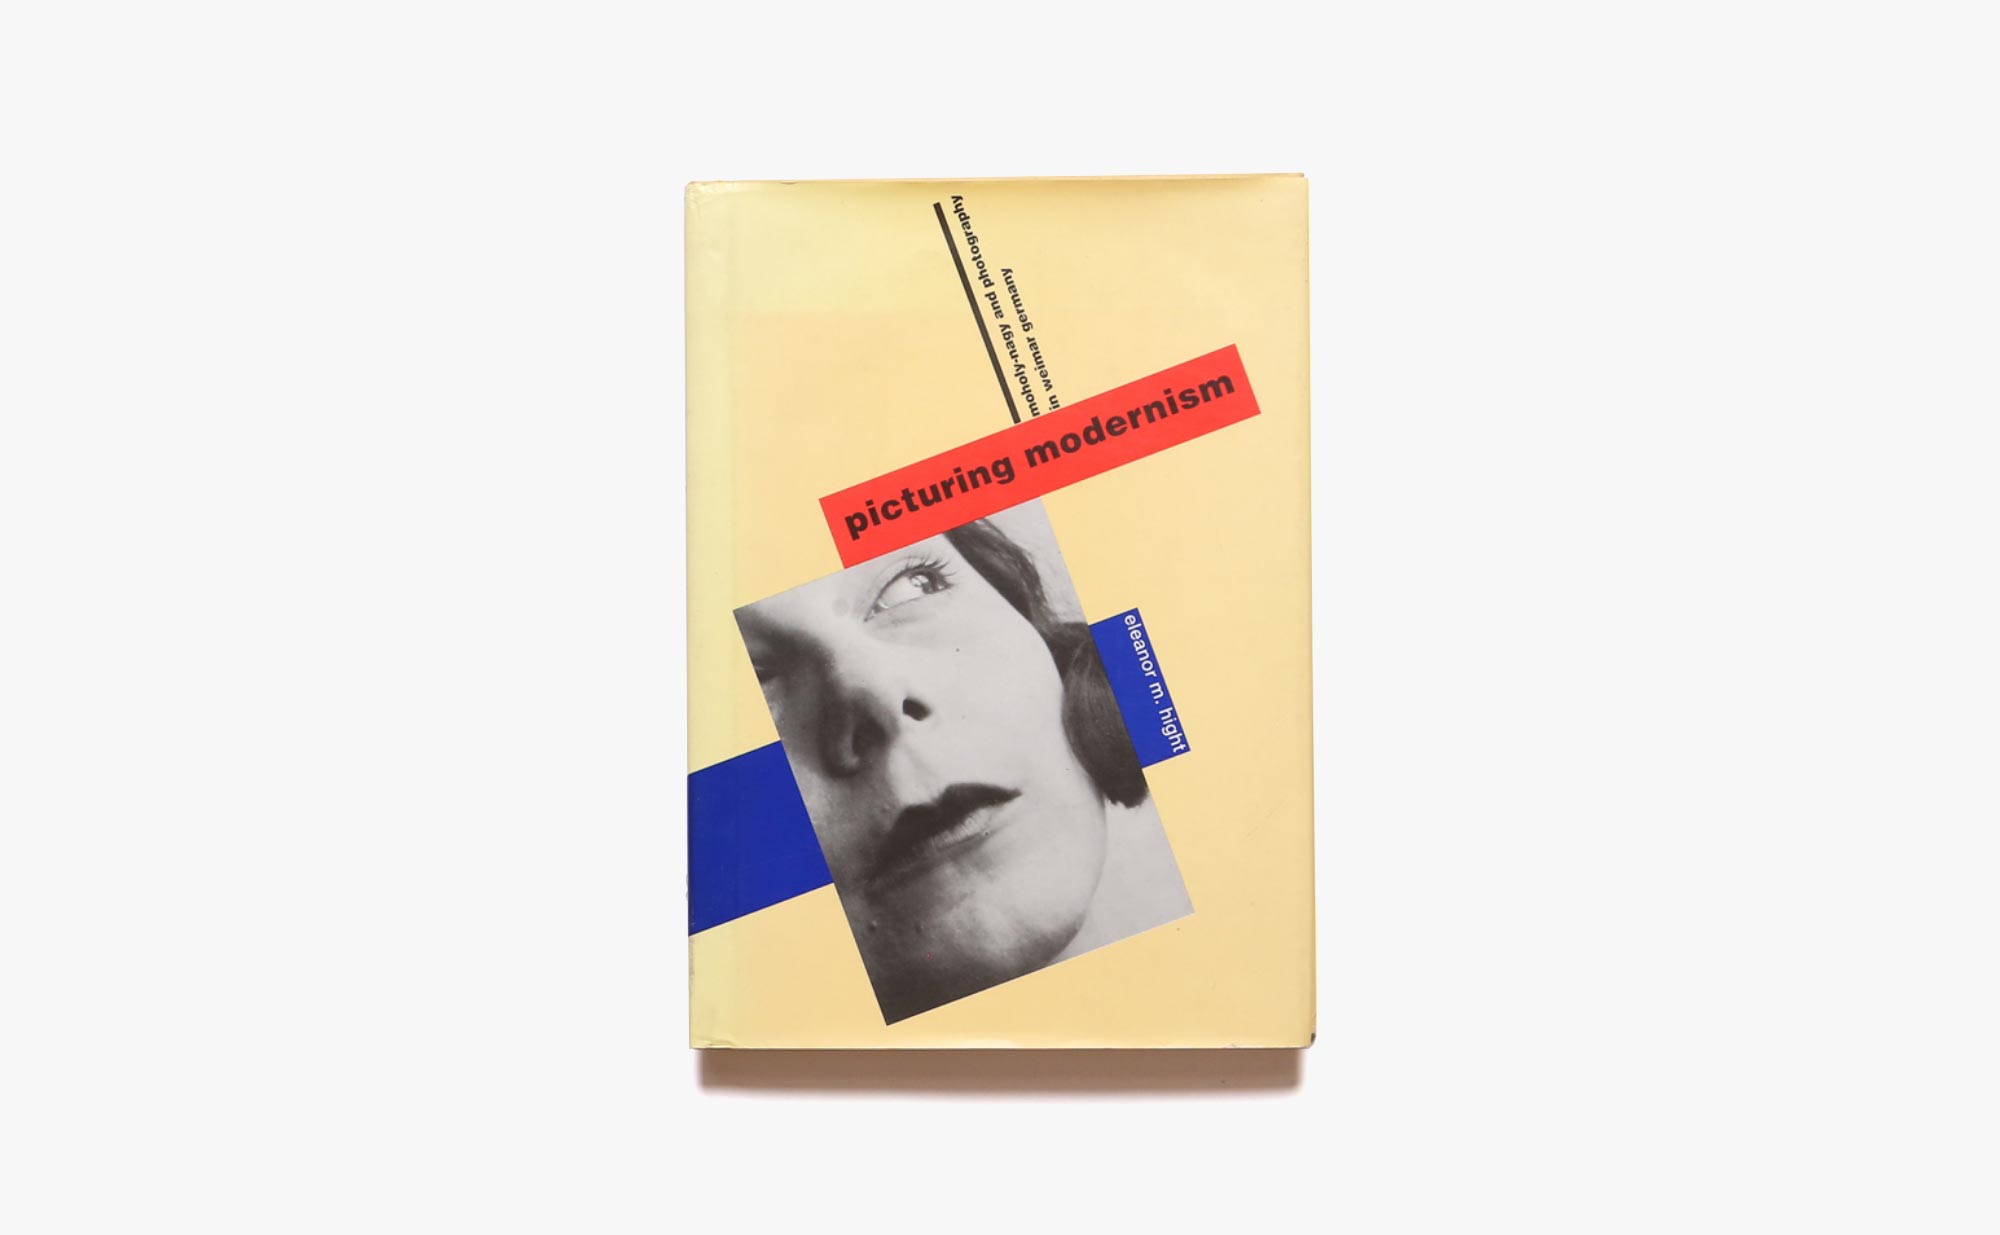 Picturing Modernism: Moholy-Nagy and Photography in Weimar Germany | モホリ＝ナジ・ラースロー